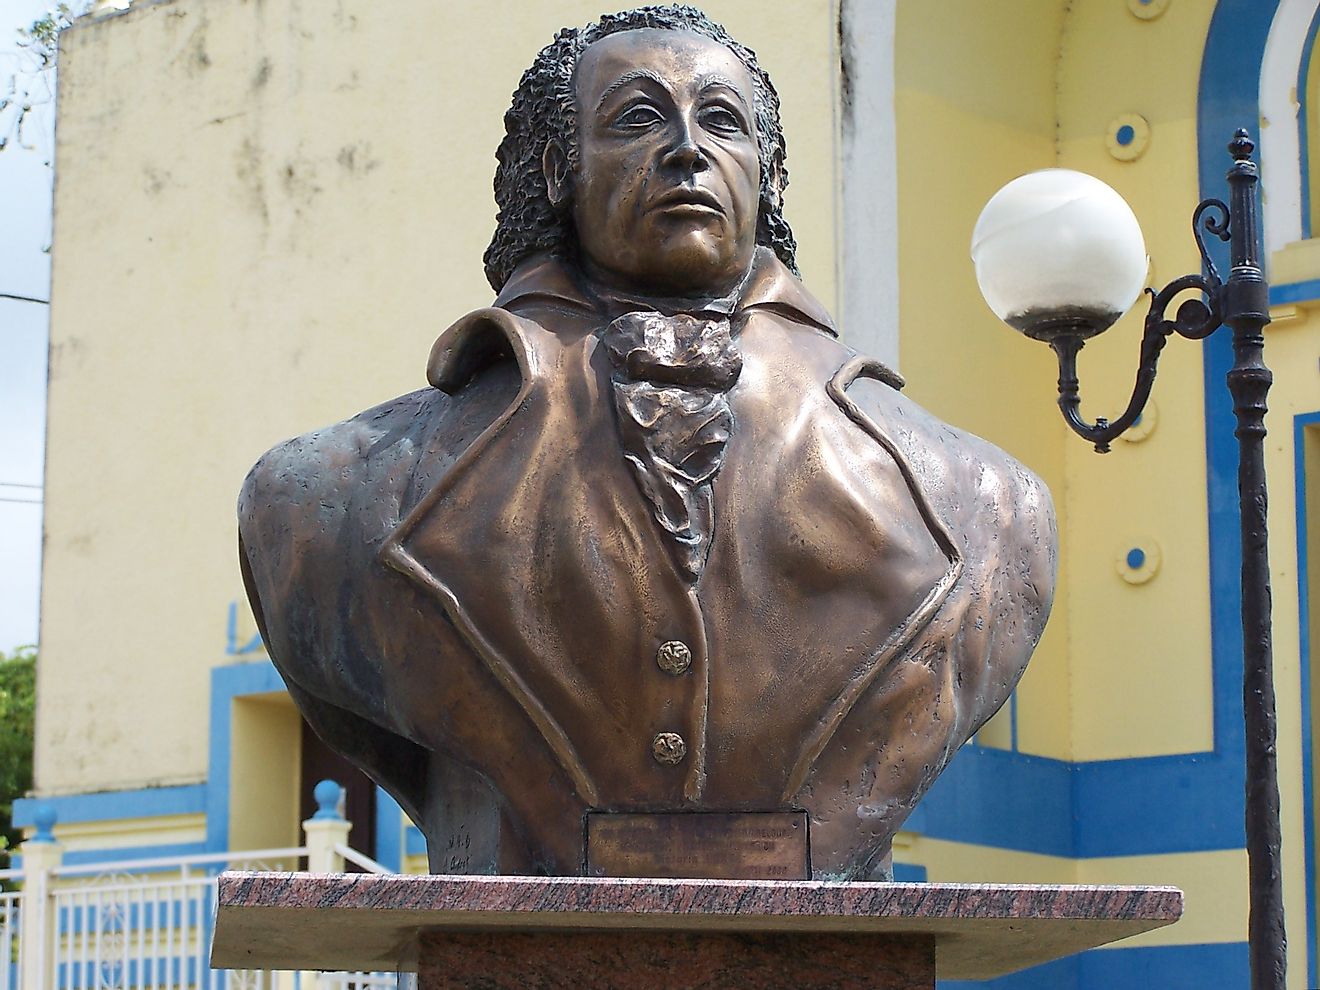 Statue of Louis Delgrès in Petit-Bourg. Image credit: LPLT / Wikimedia Commons